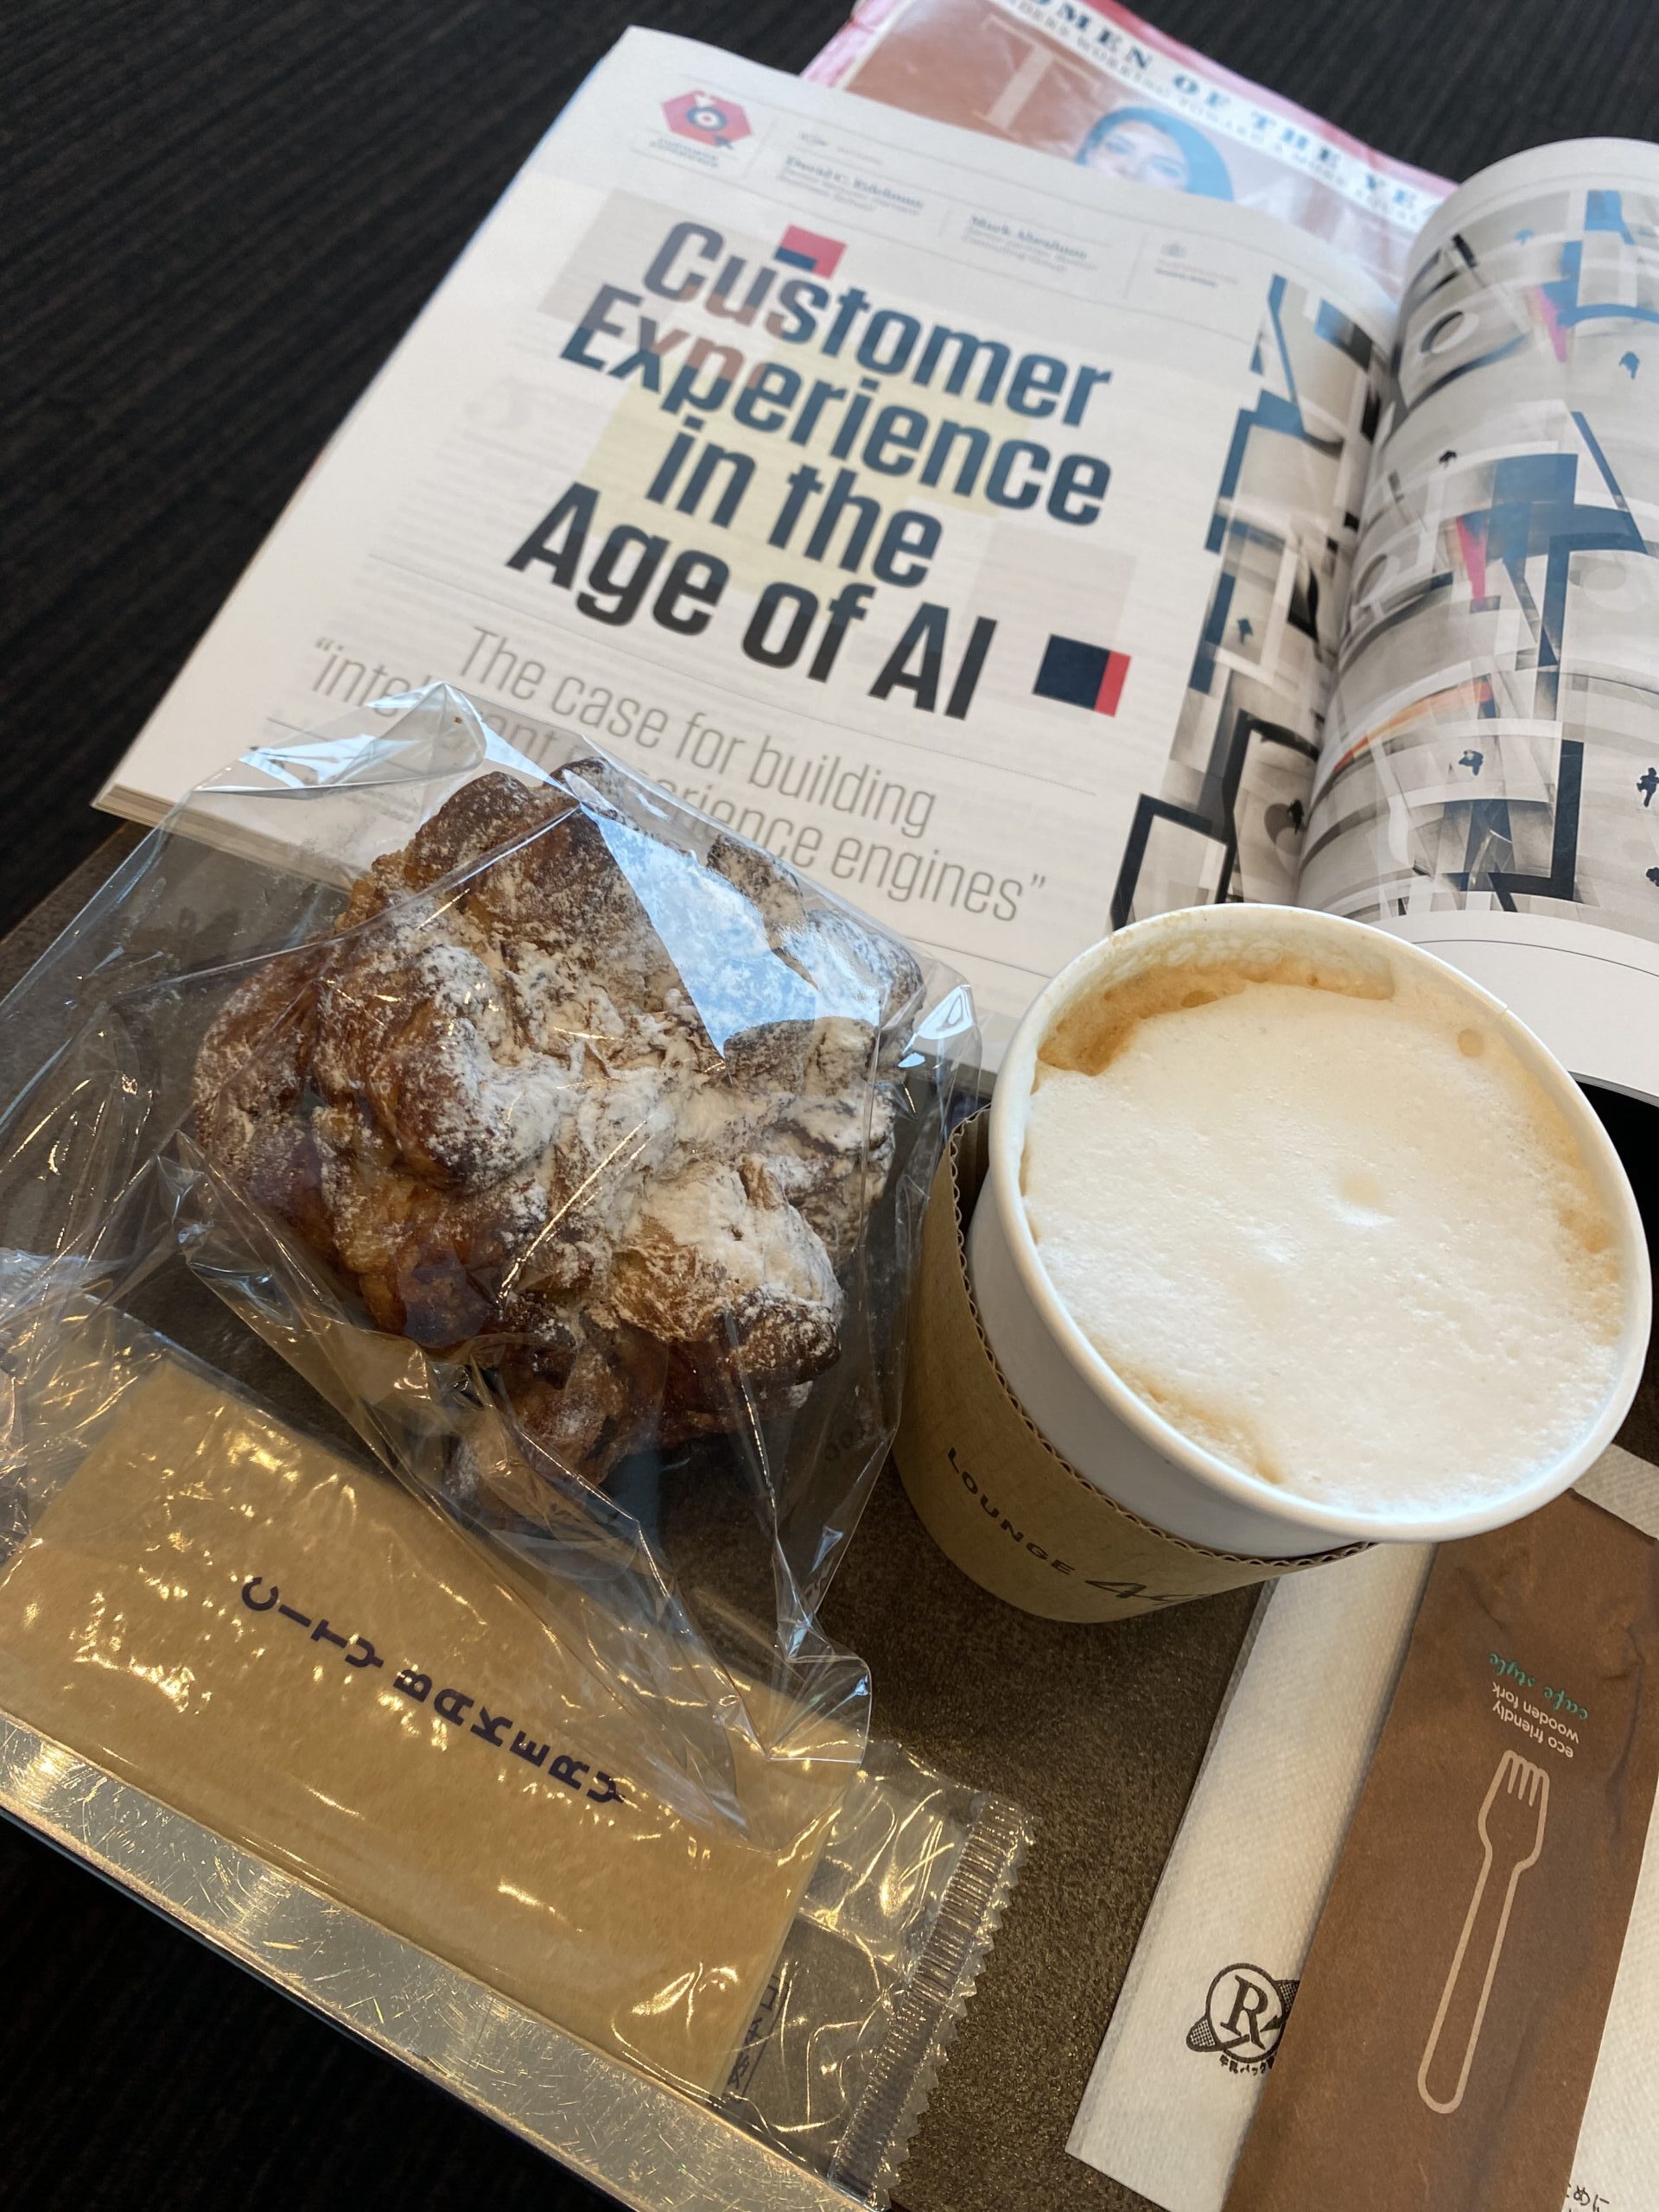 Harvard Business Review and City Bakery's Scone